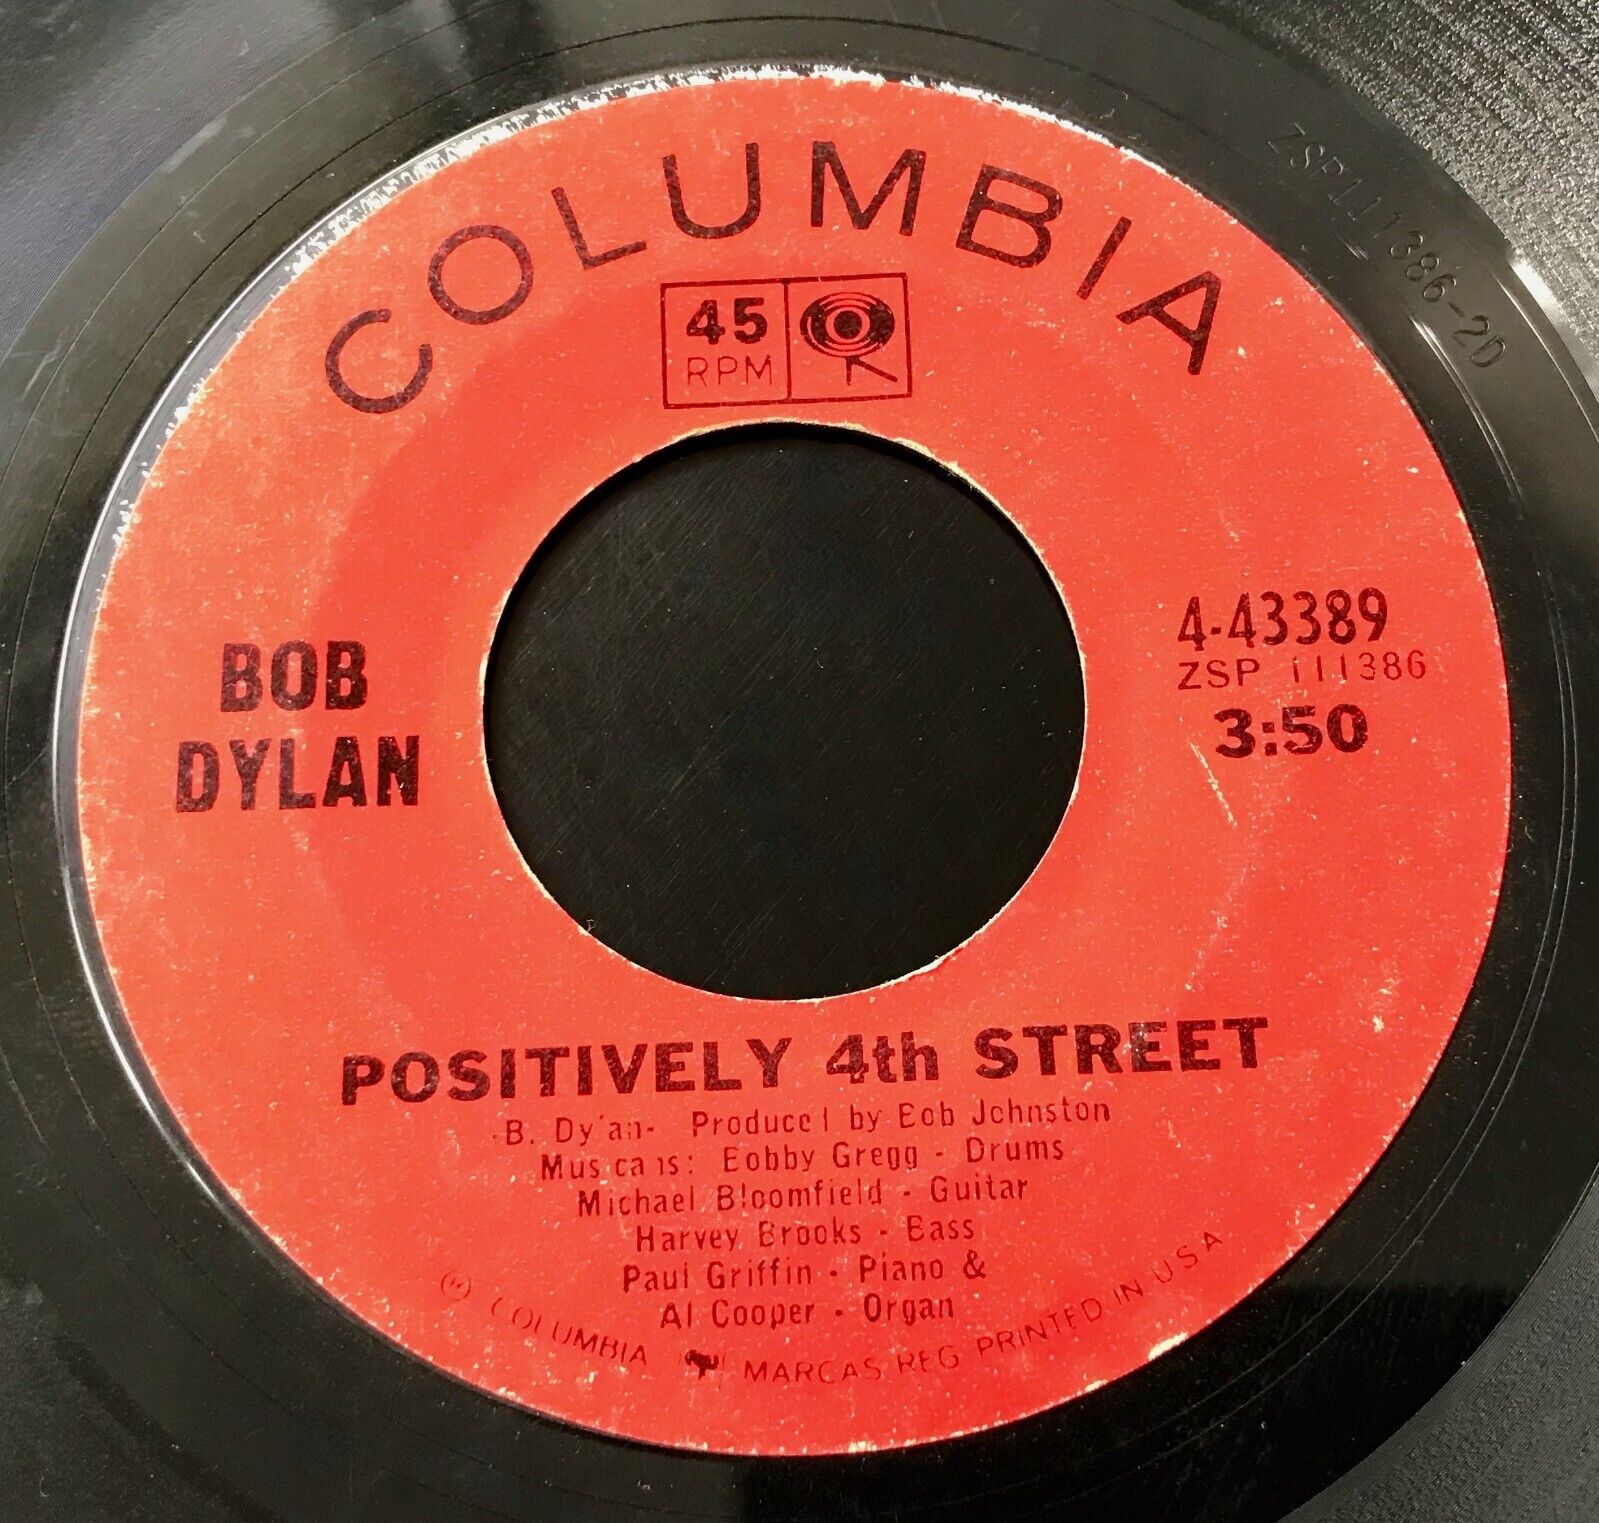 Bob Dylan Positively 4th Street/From A Buick 6 45 rpm